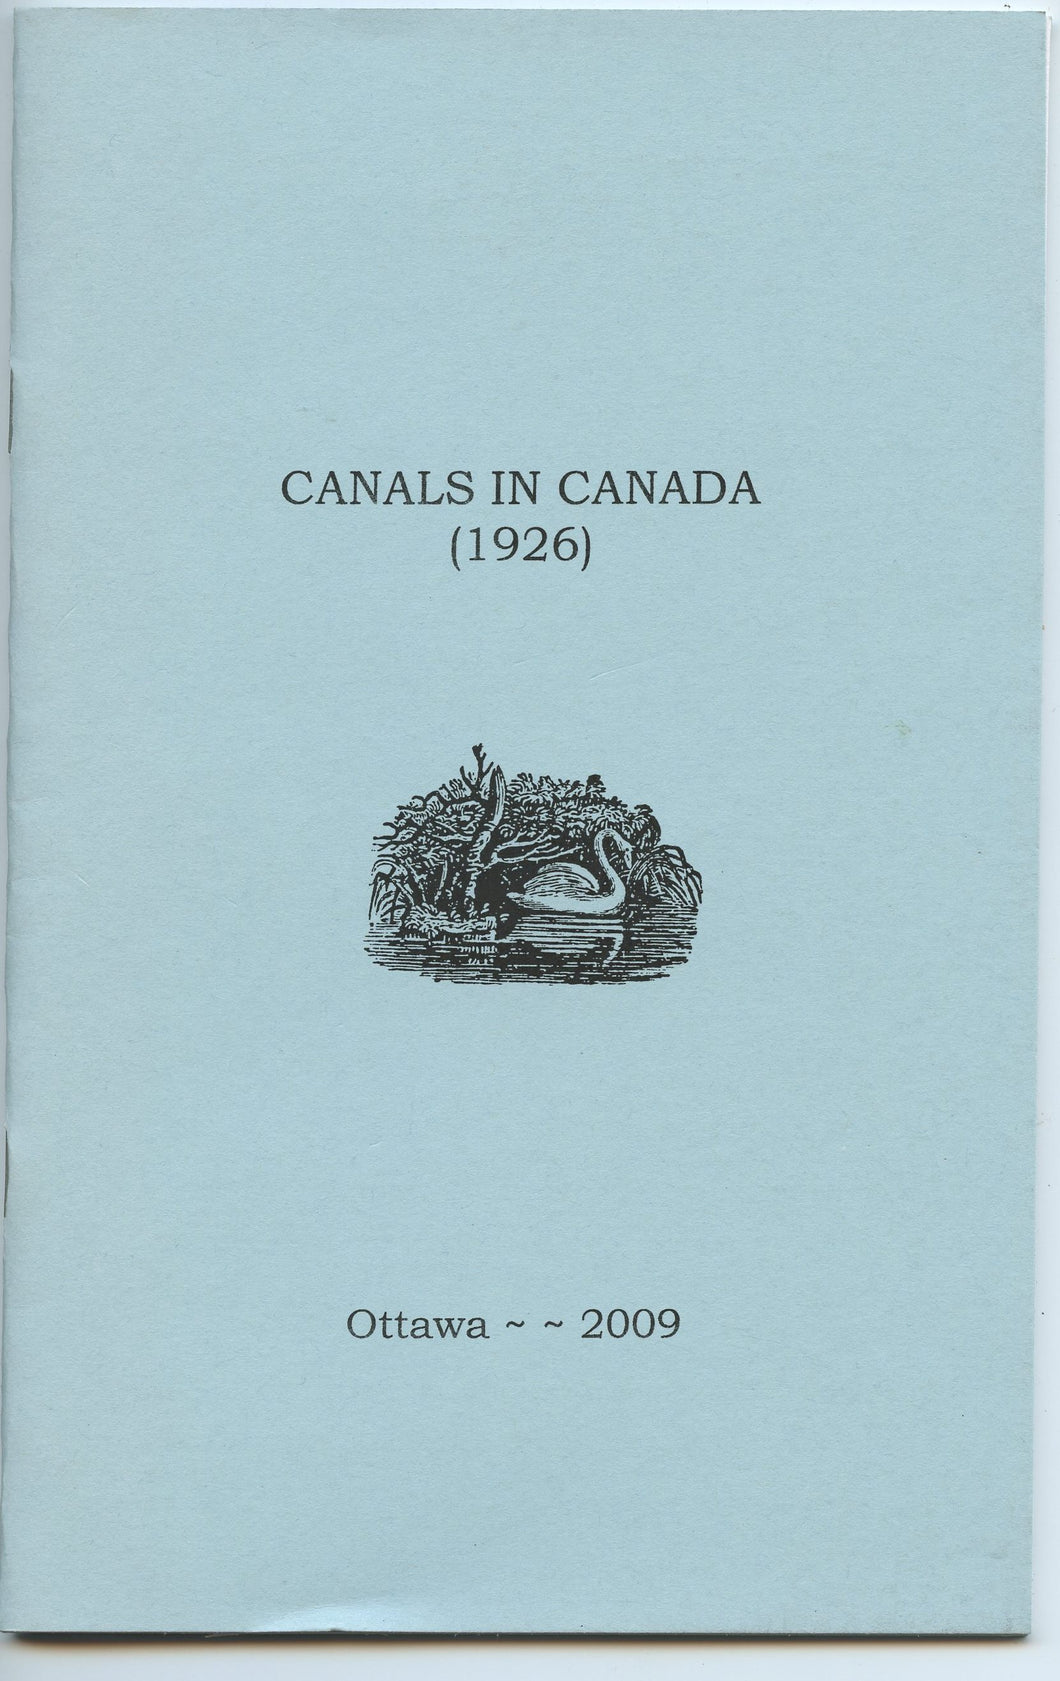 Canals in Canada (1926)